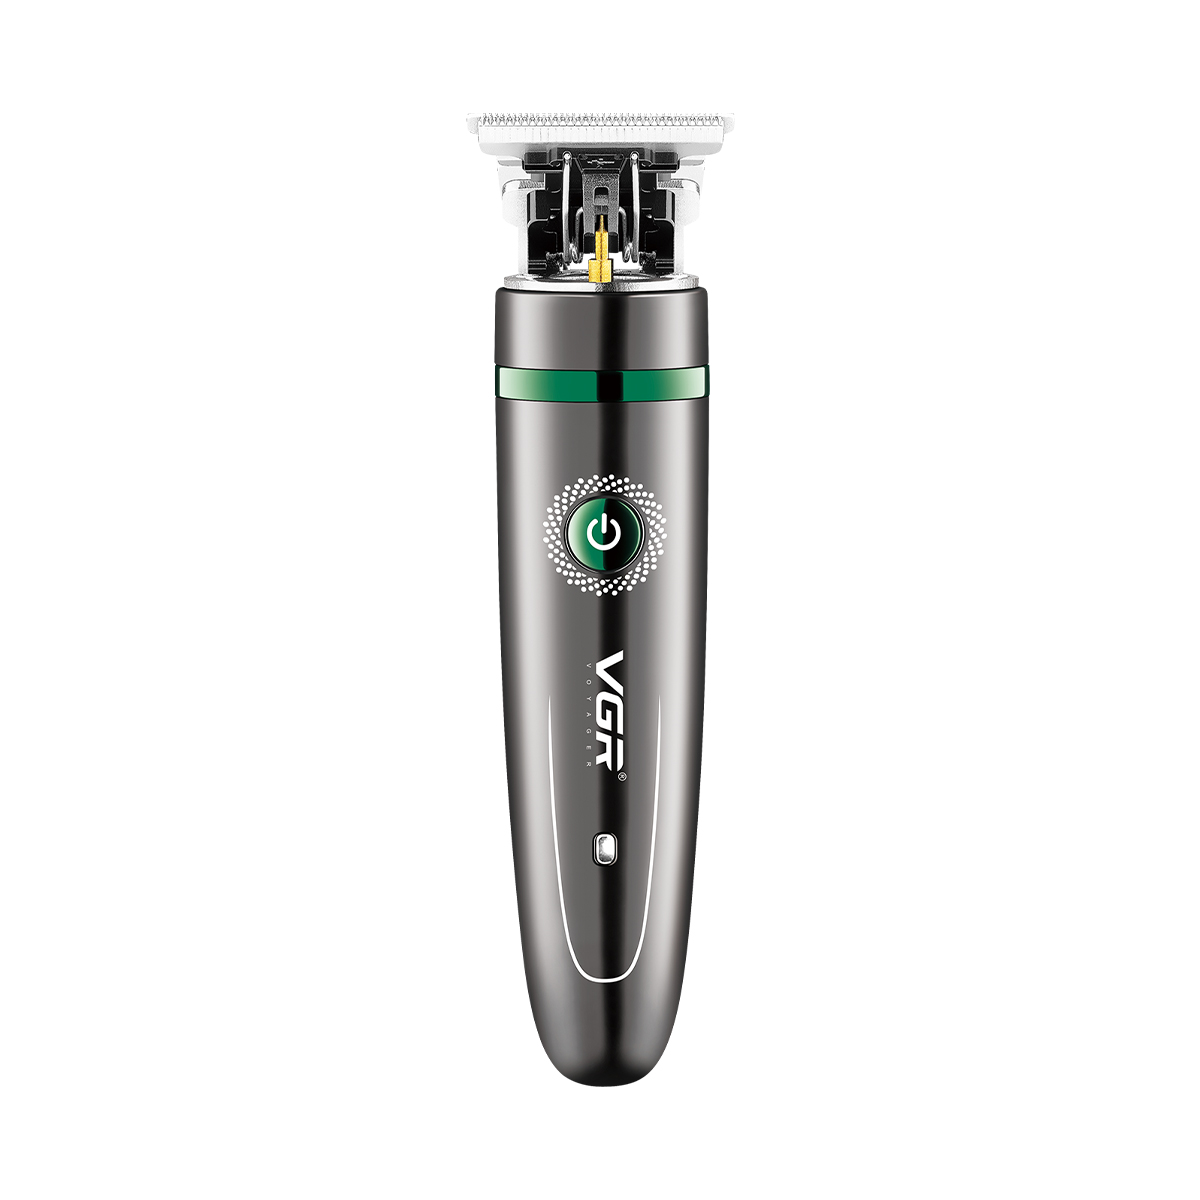 electric nose hair trimmer supplier, electric nose trimmer factories, manual nose hair trimmer factory, nose clipper trimmer factories, electric nose hair trimmer factory